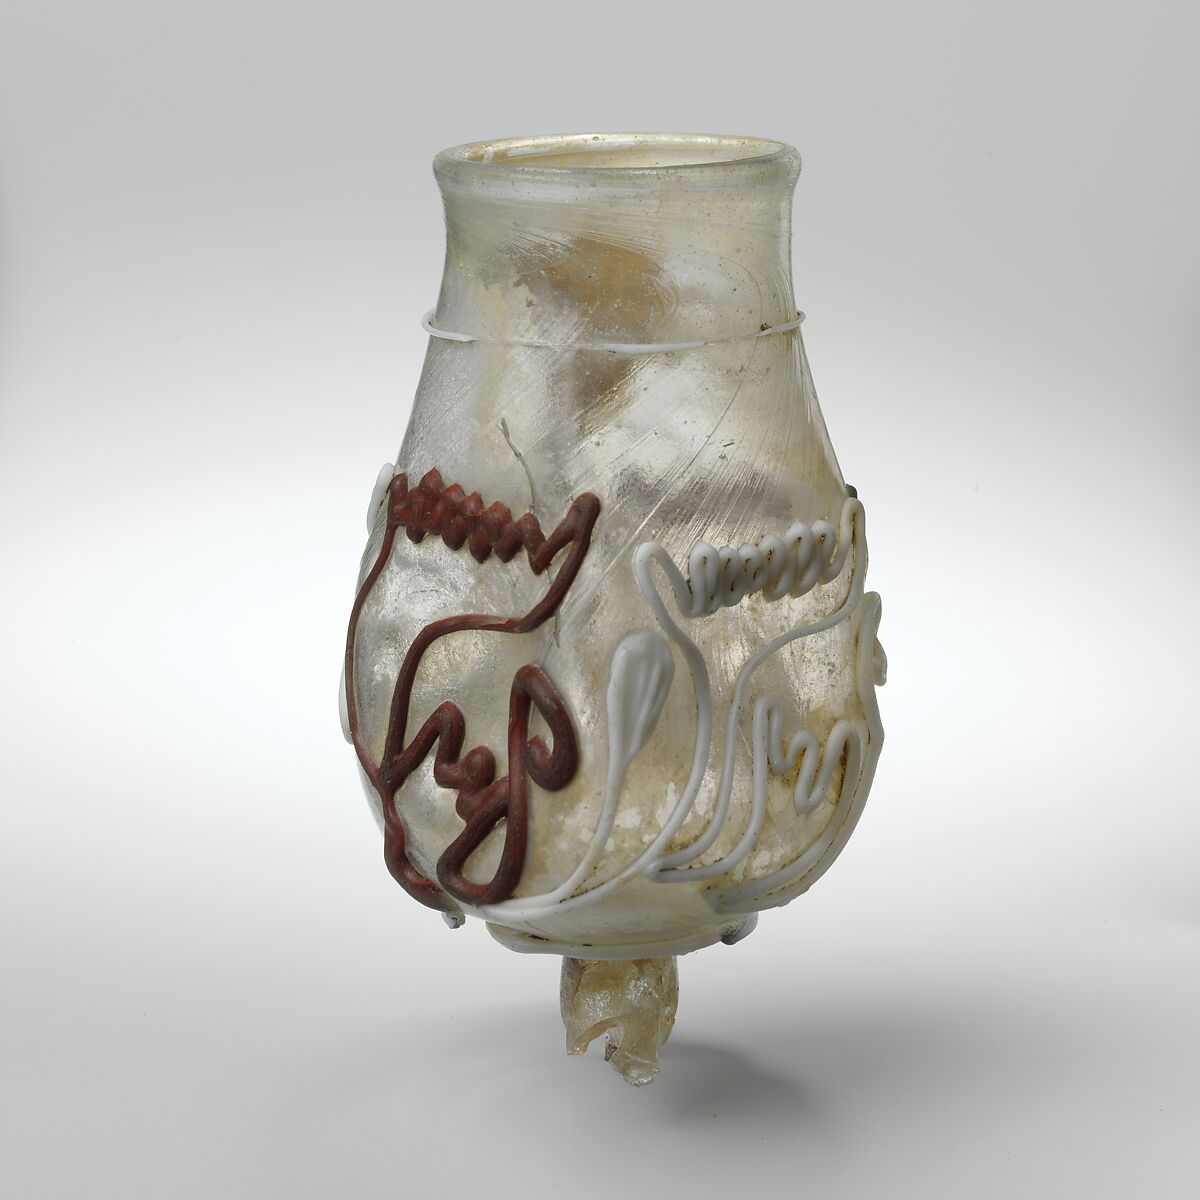 Glass goblet with snake-thread decoration, Glass, Roman